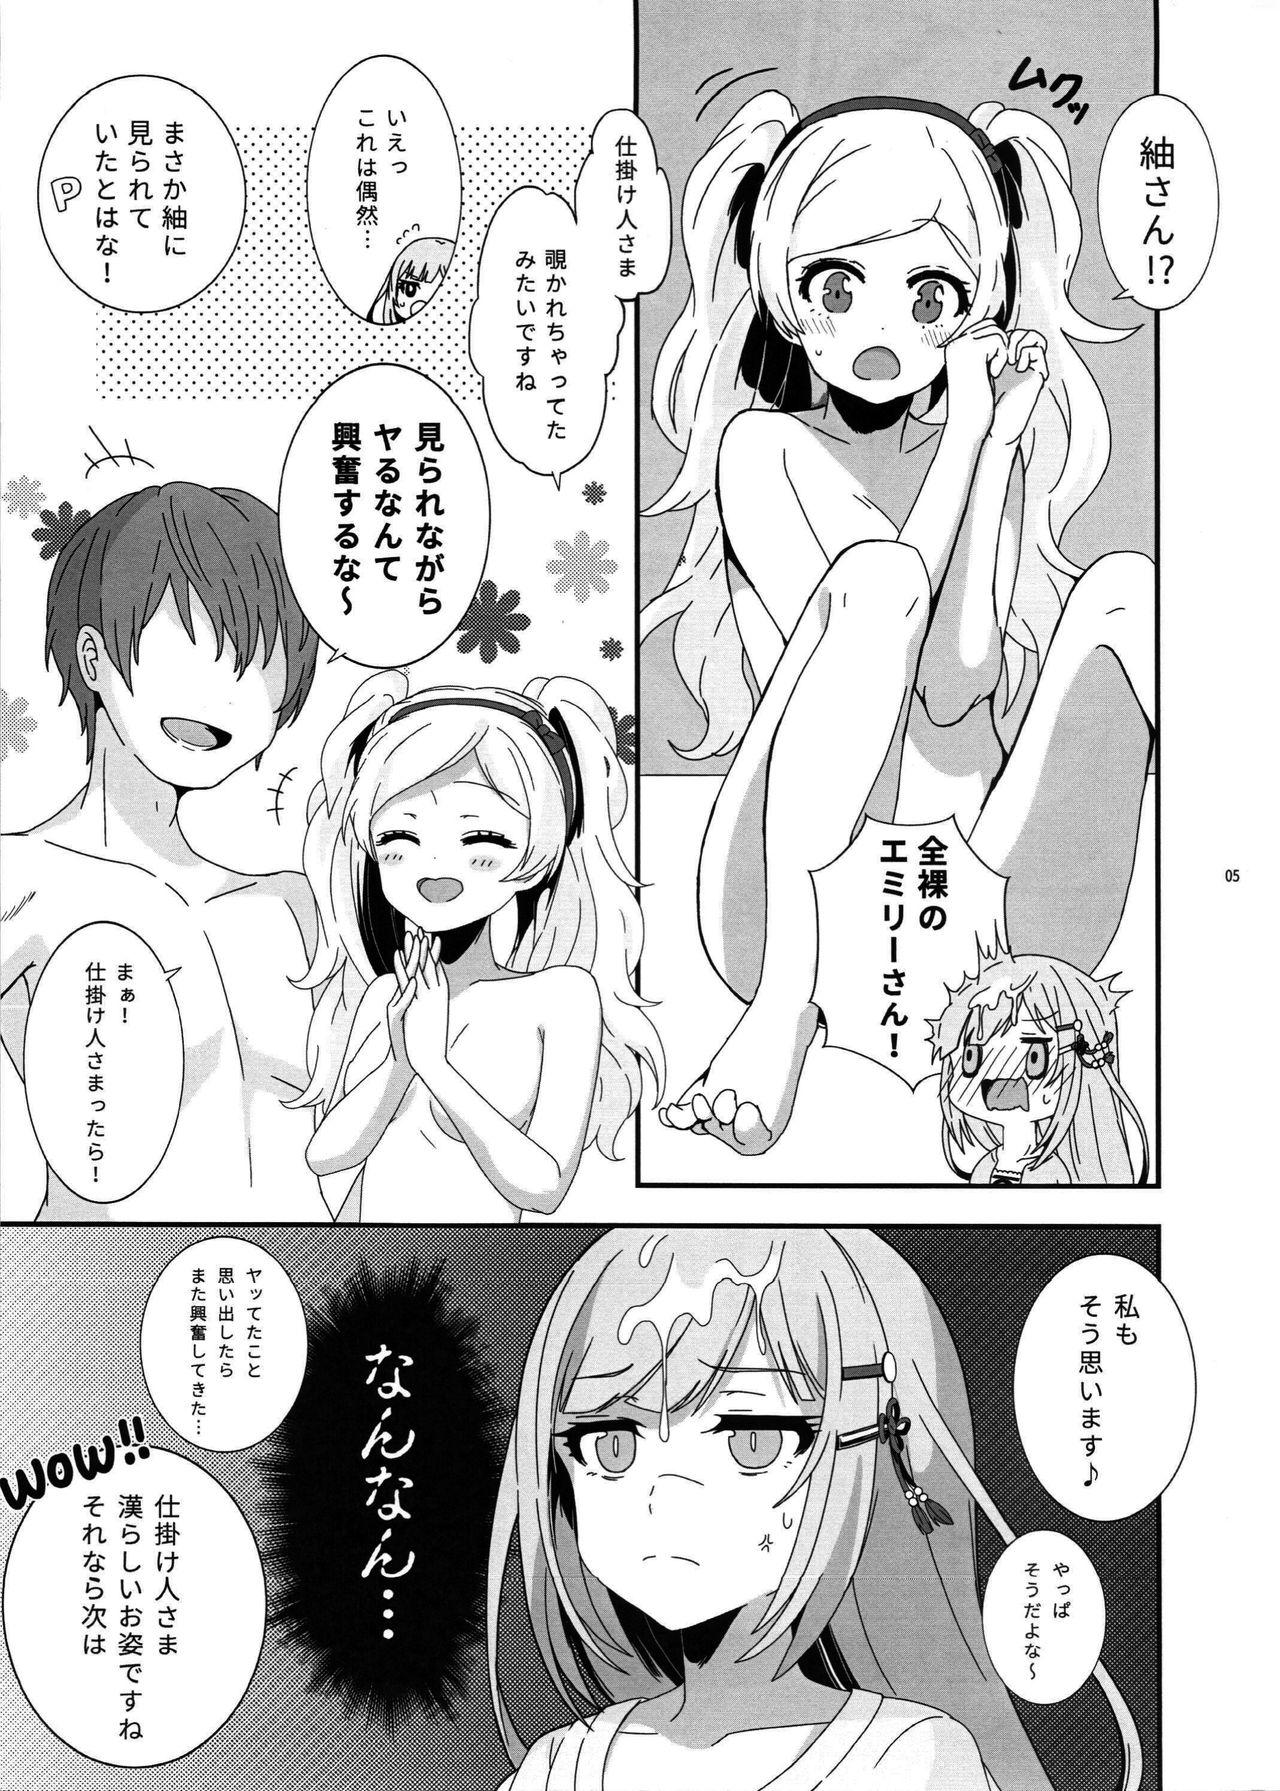 Outside SPARK - The idolmaster Punished - Page 6